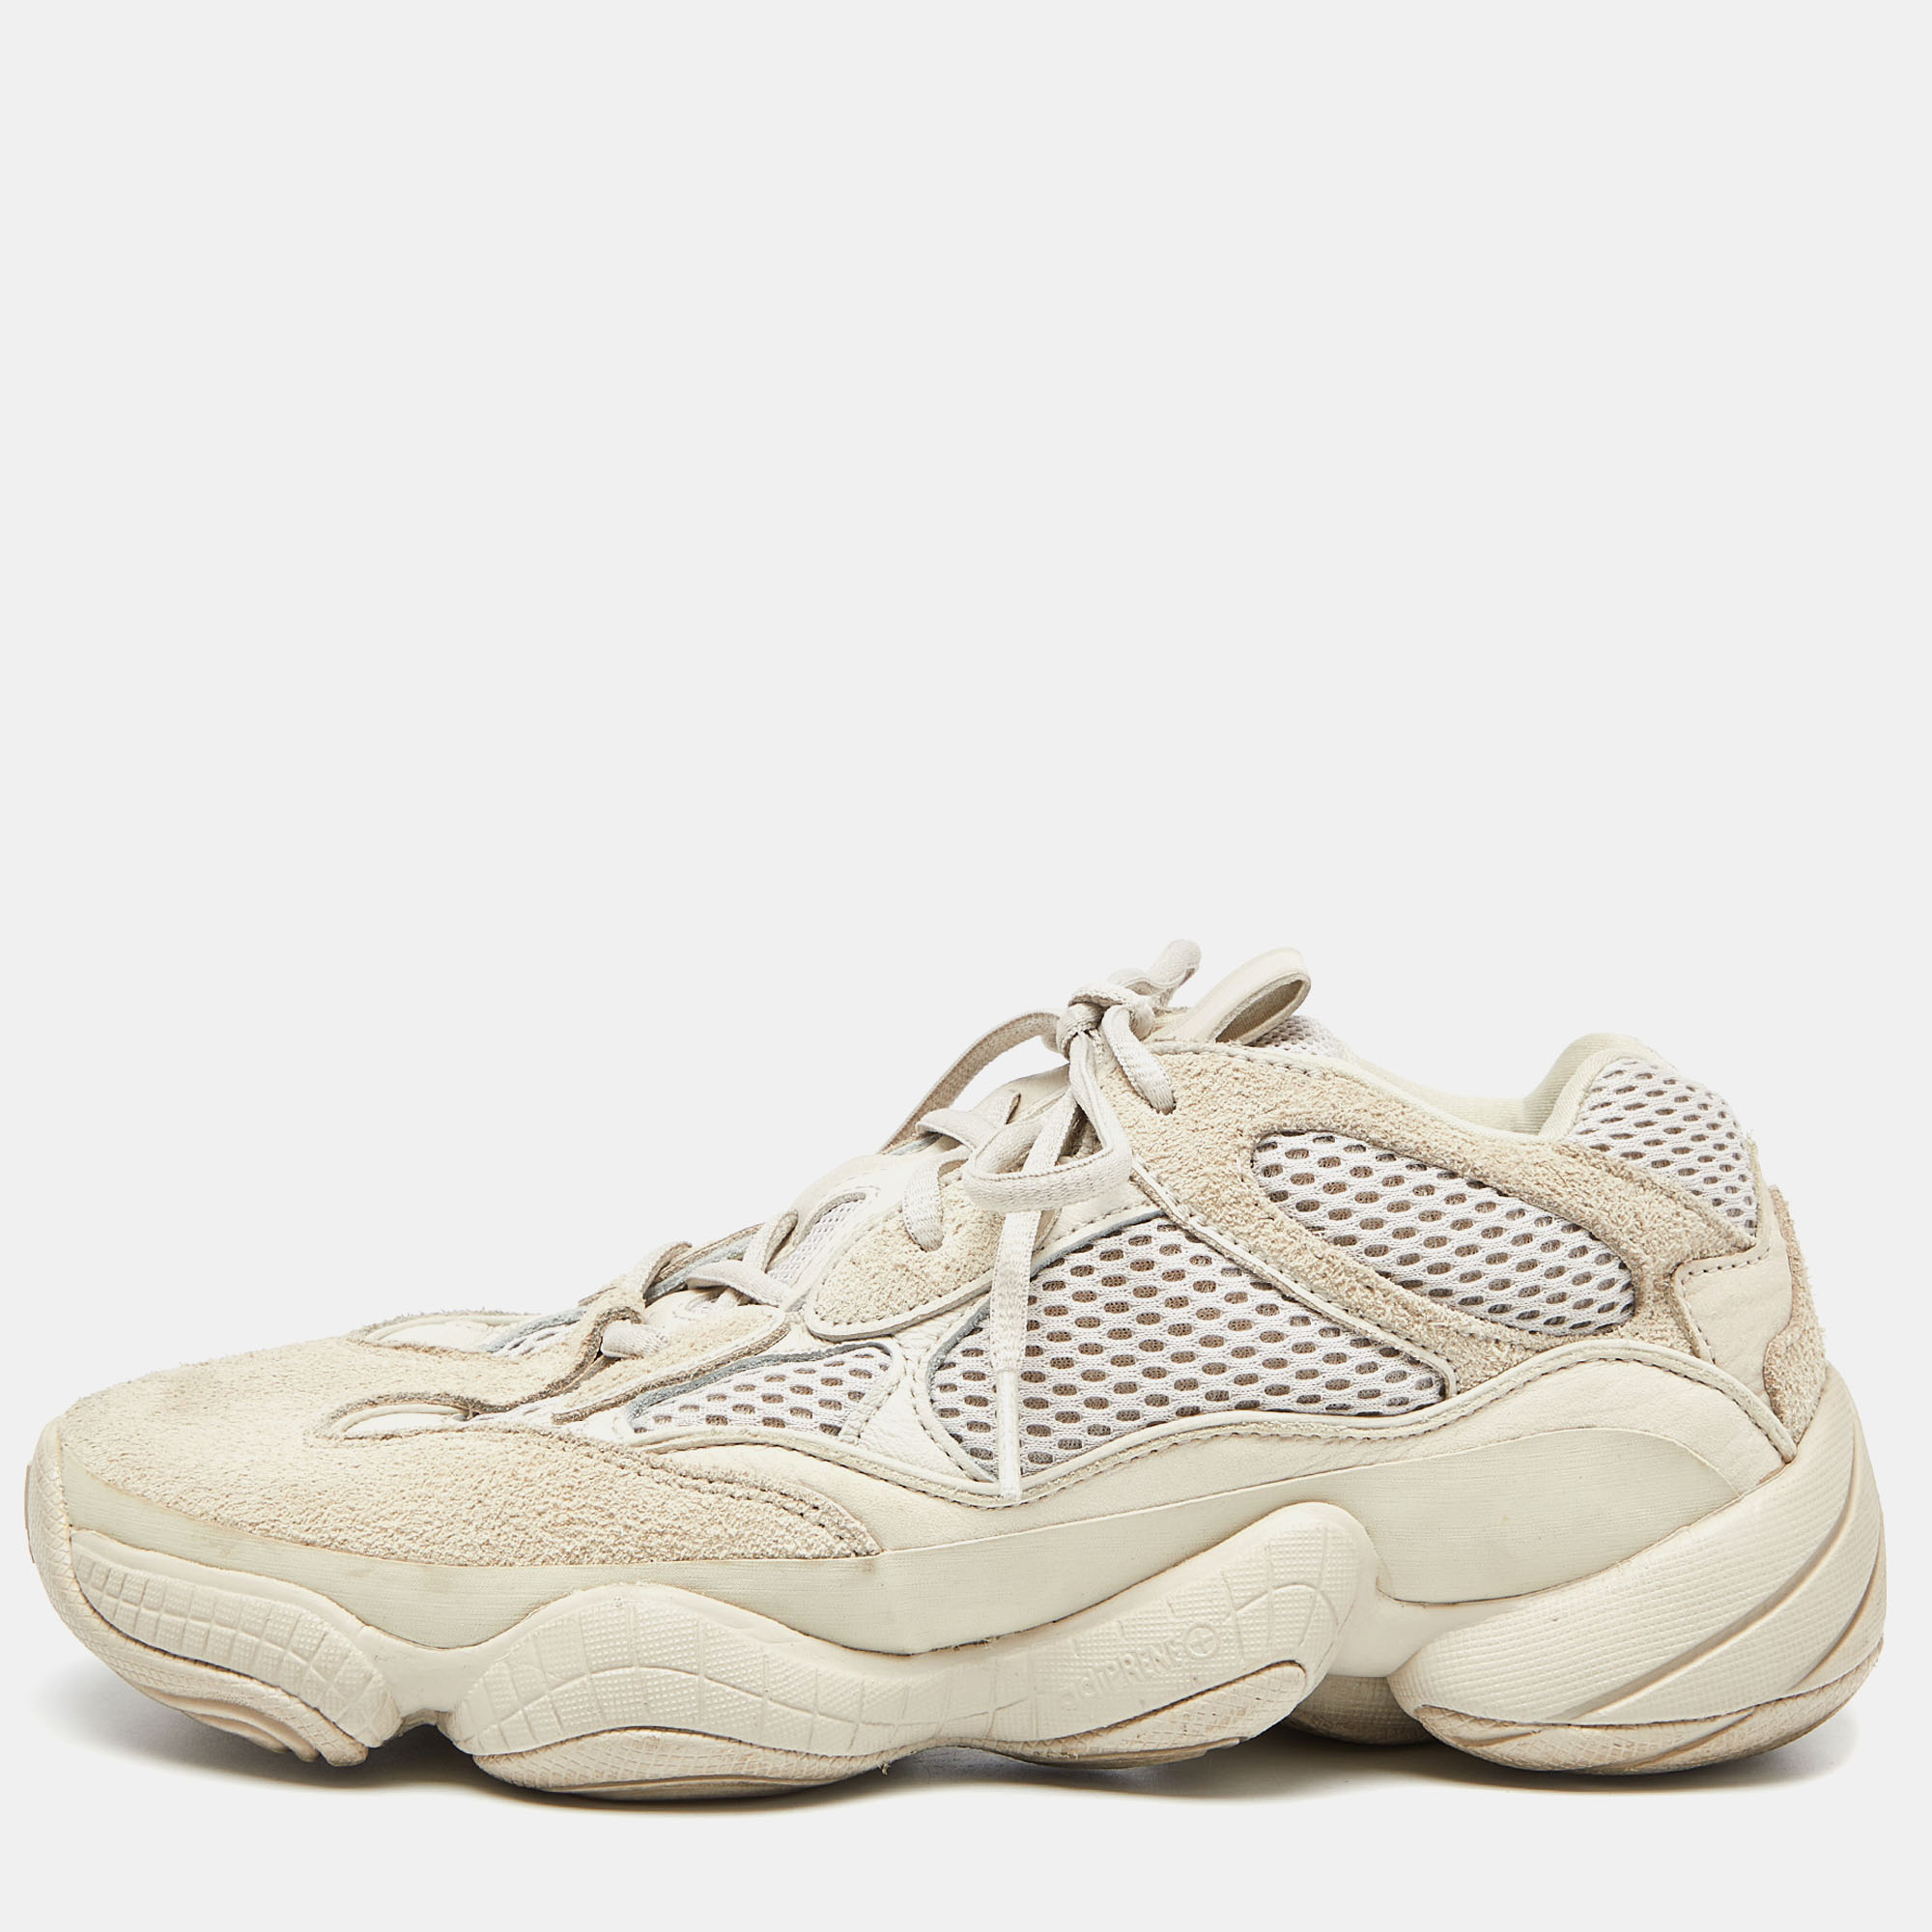 

Yeezy x Adidas Cream Suede and Mesh Yeezy 500 Blush Sneakers Size